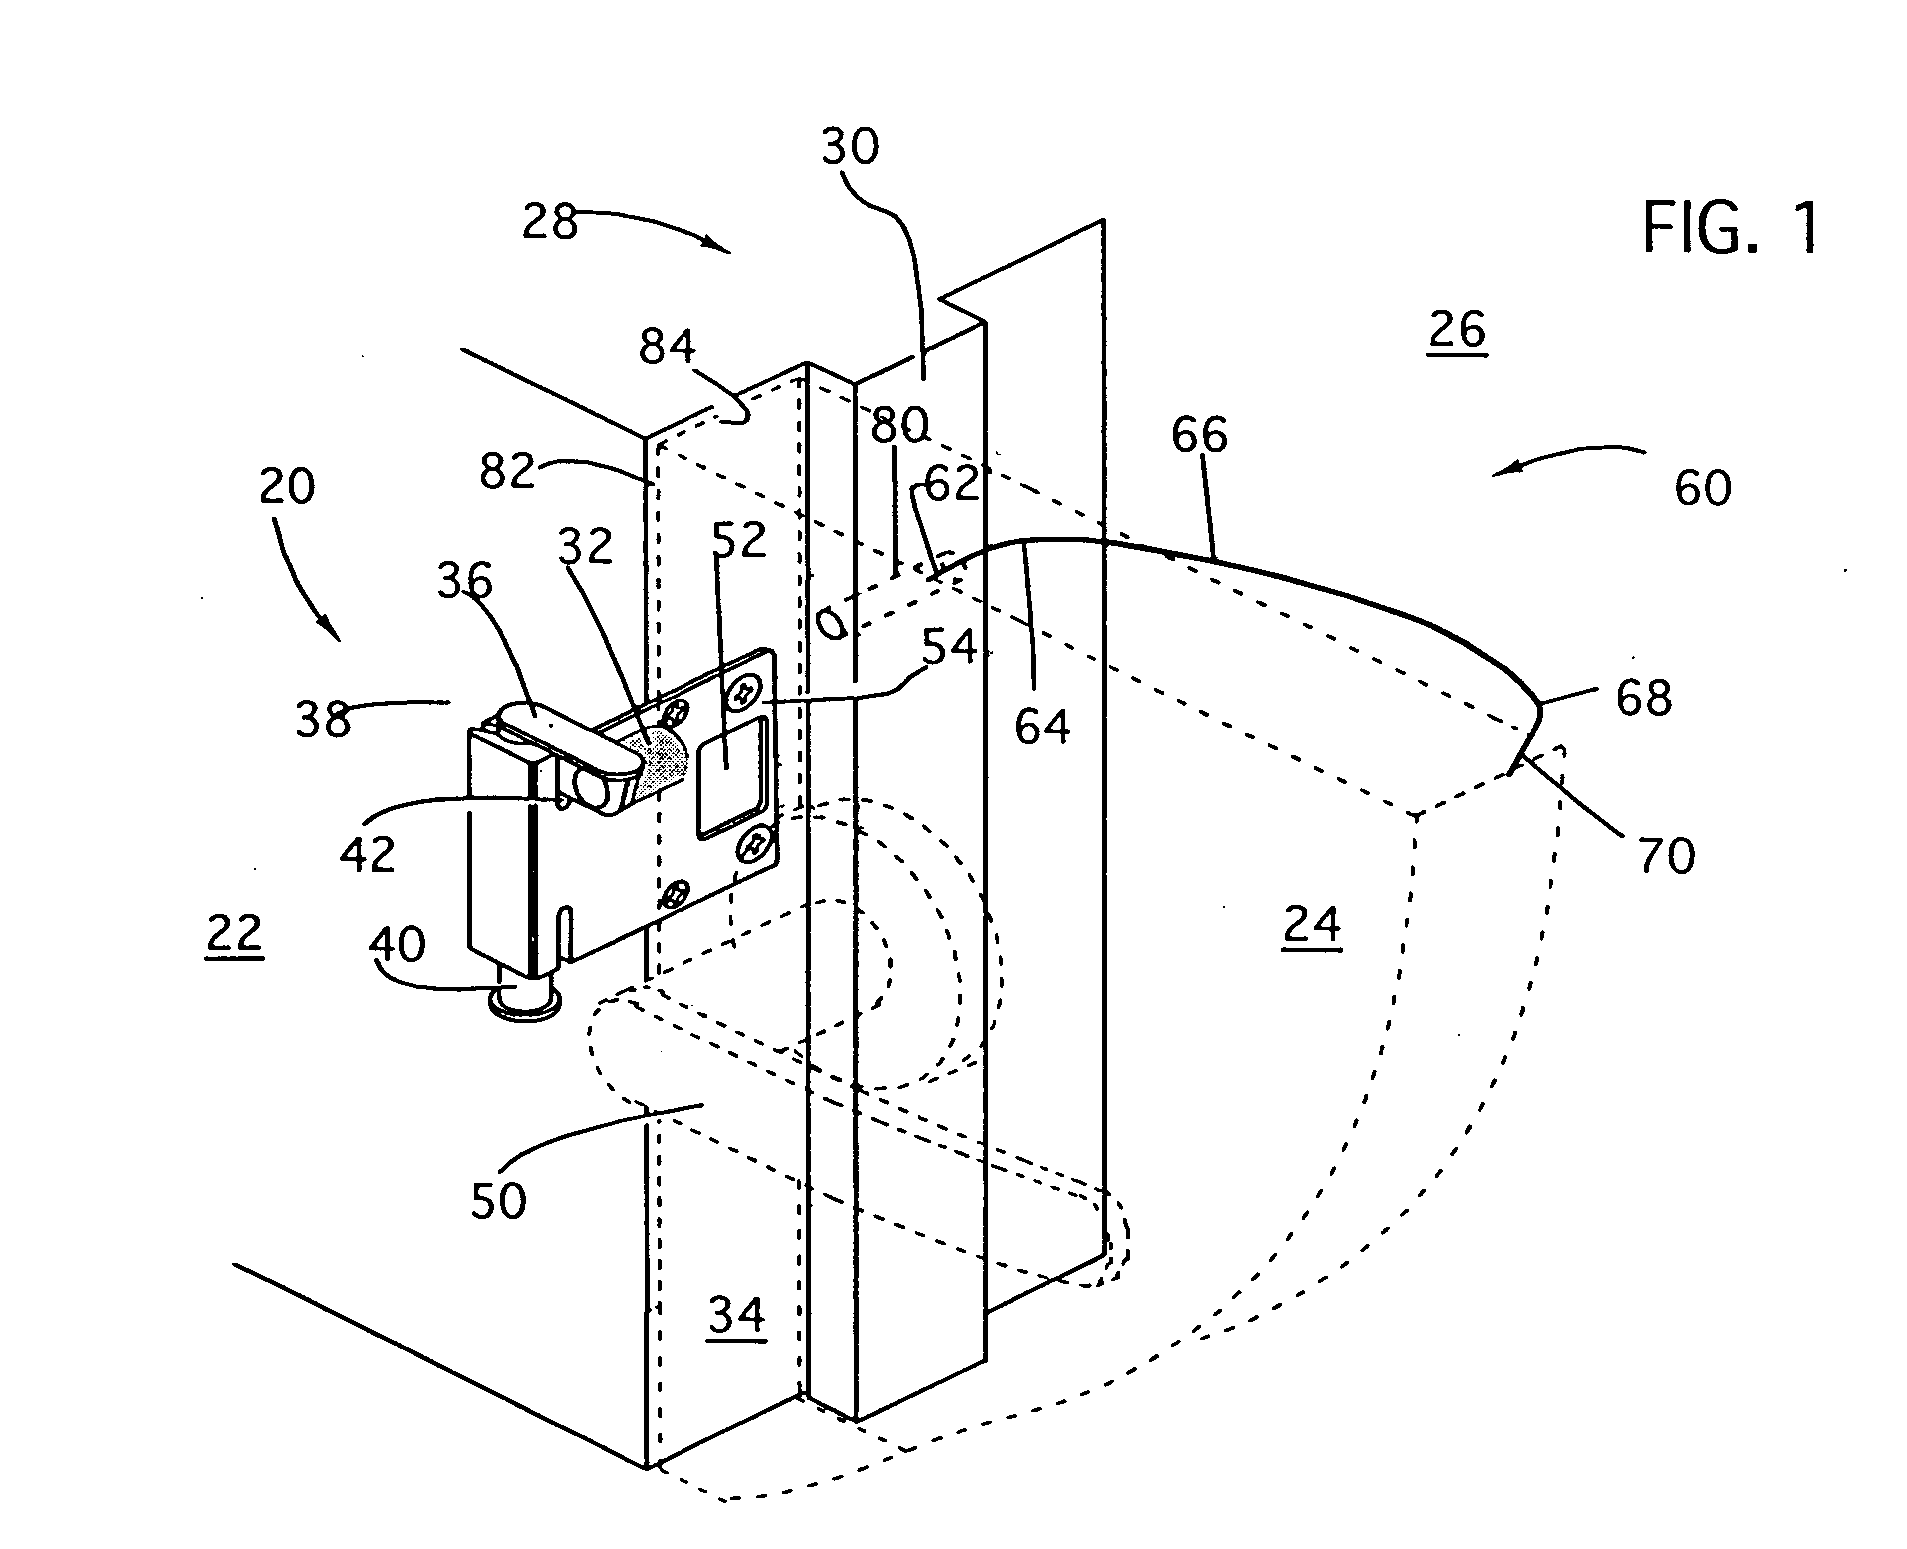 Apparatus for opening a closed latch and method for using the same